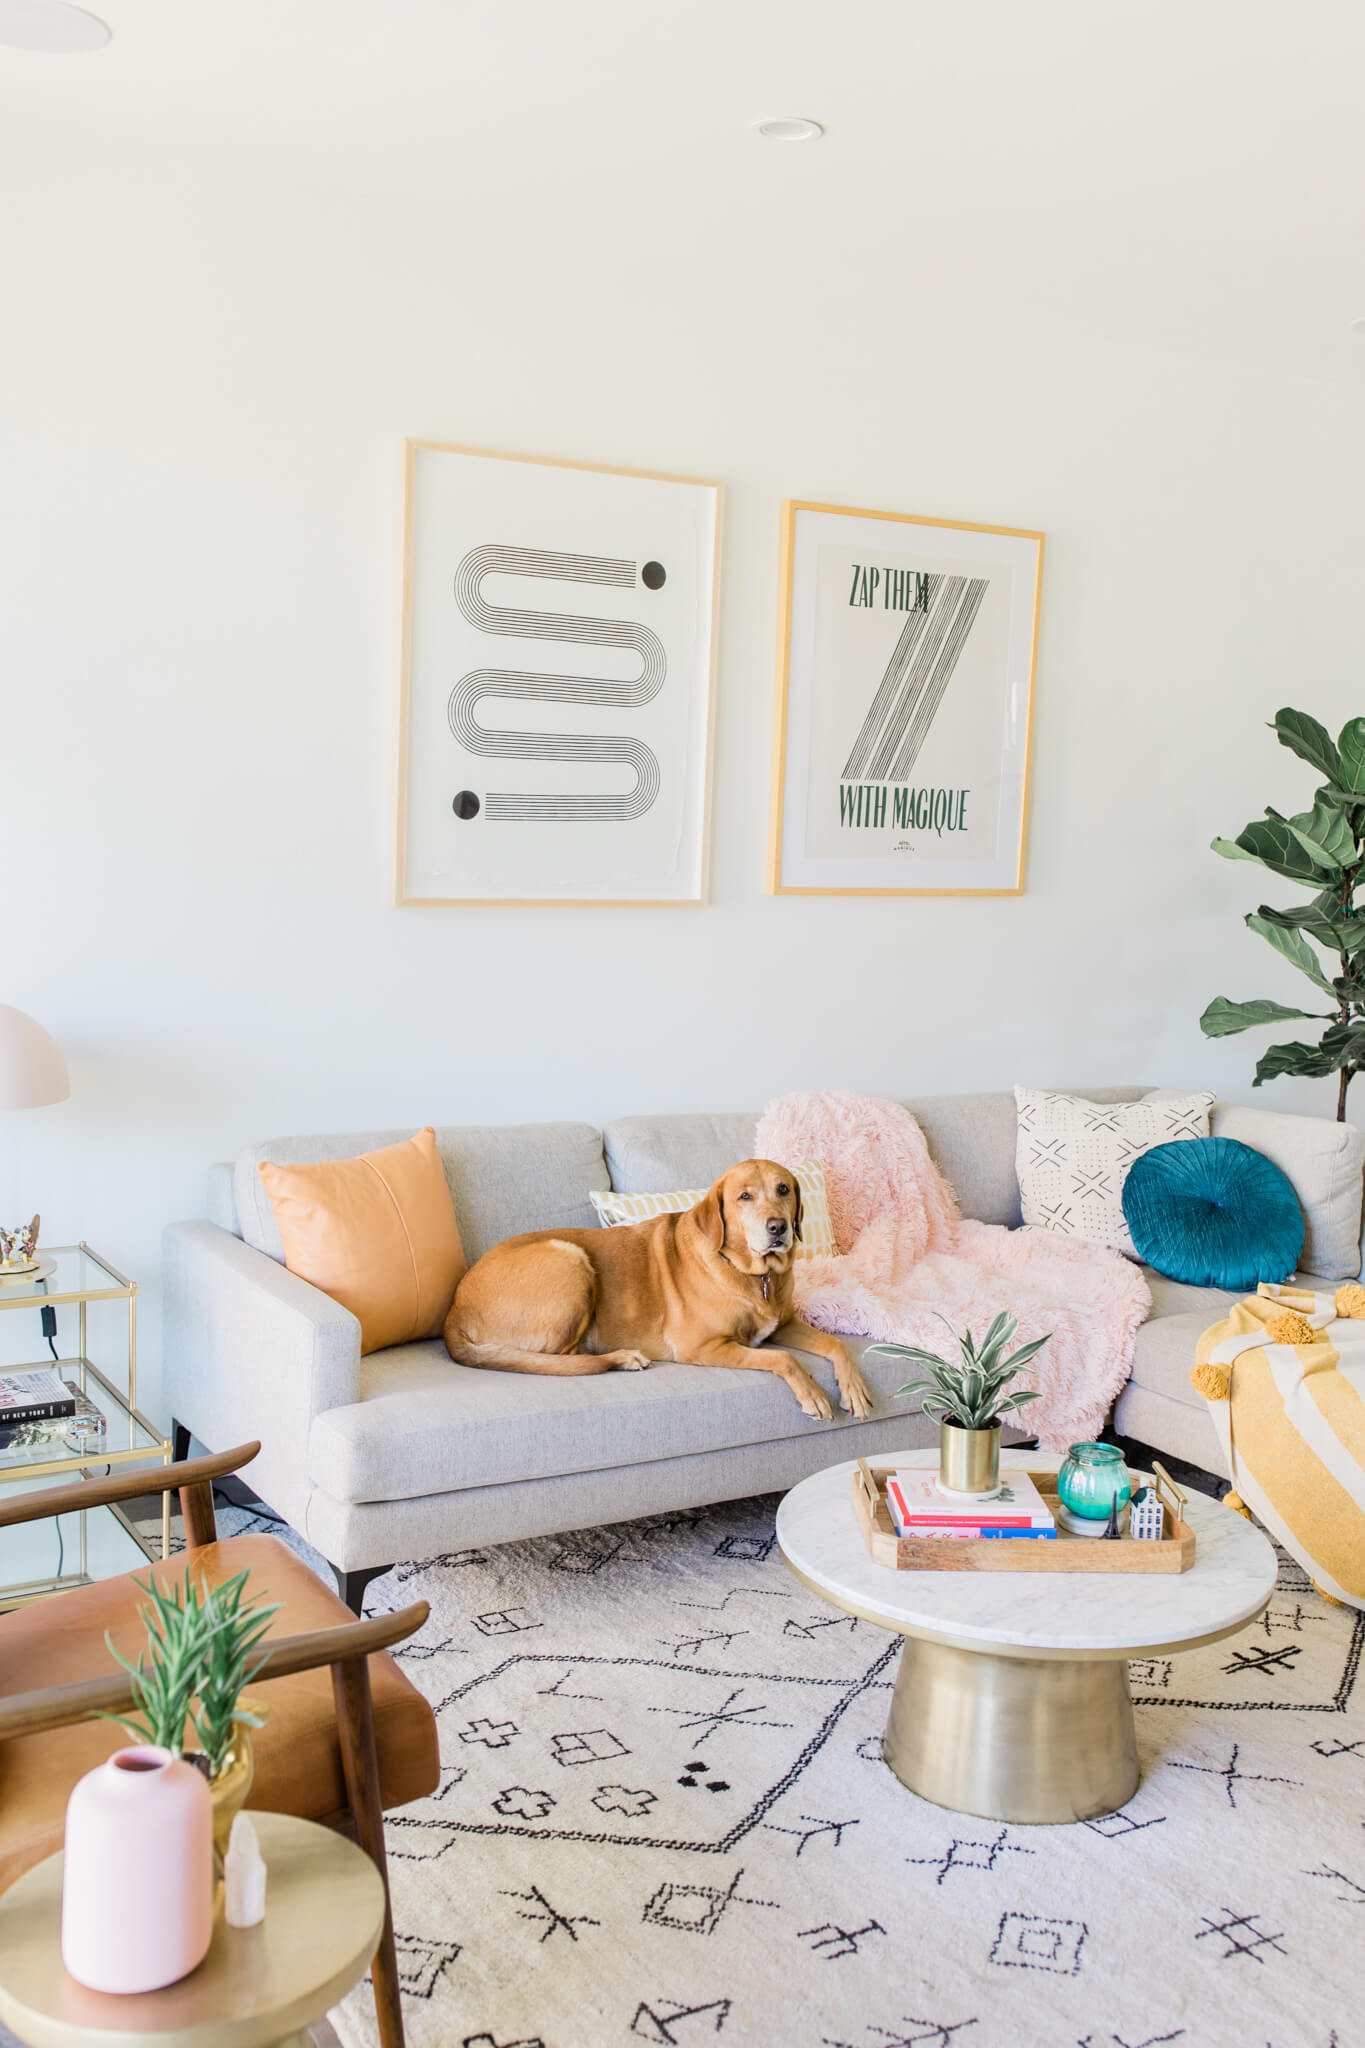 Obsessed with our living room decor reveal! After years of neglecting this space we finally were able to get our vision through and get our living room cozy.